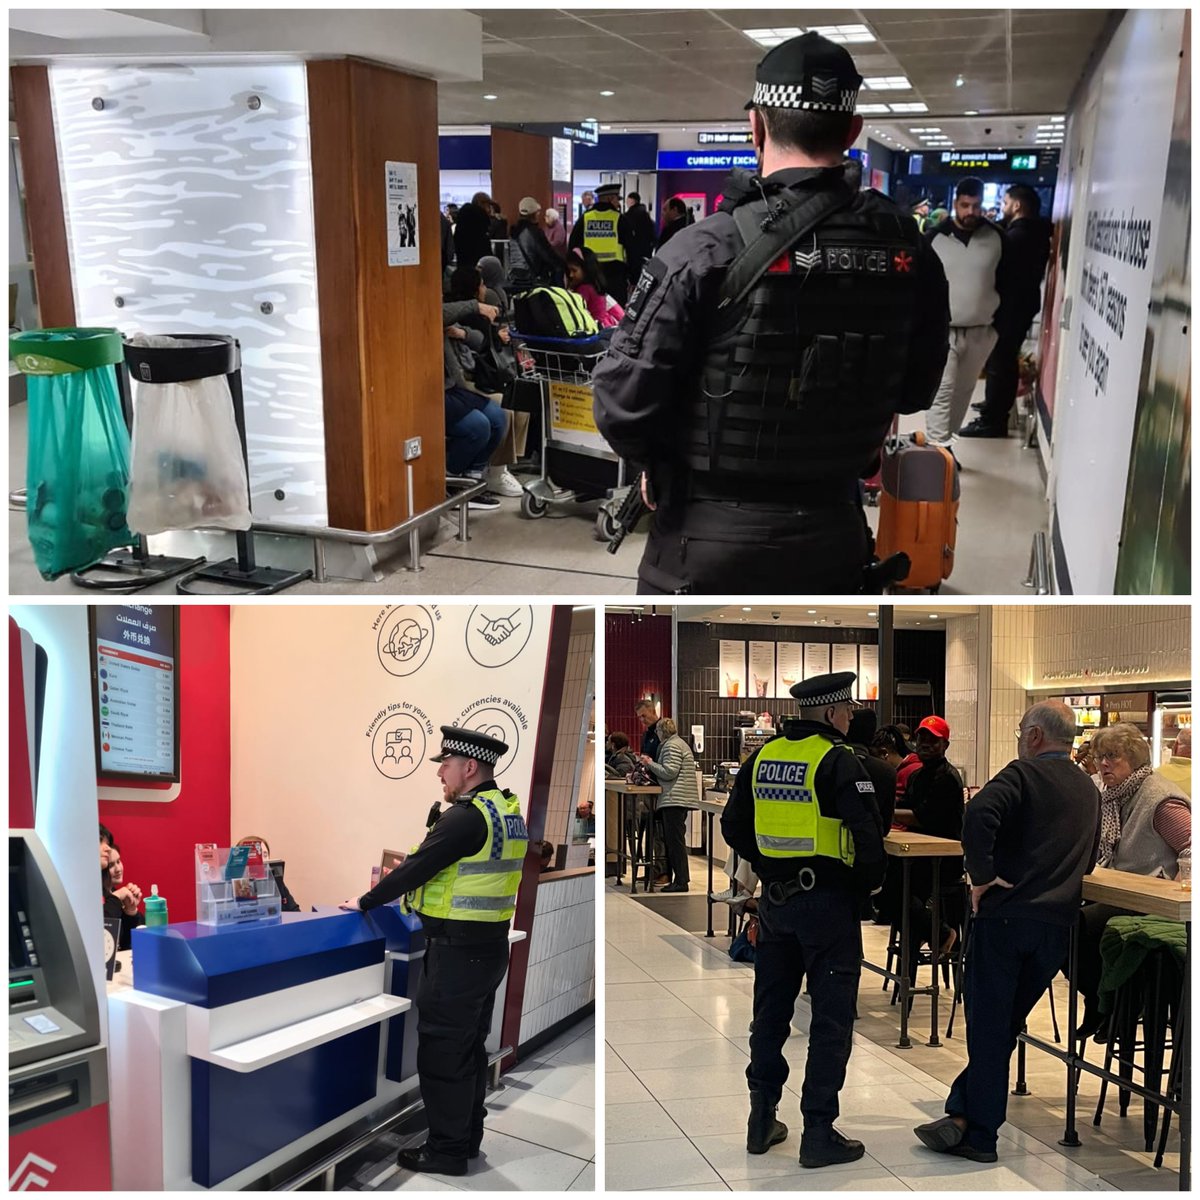 If you were at @manairport this morning you may have seen our specially trained #ProjectServator officers. We work with the public, businesses & security to have more 👀 & 👂 out there to report suspicious activity. We use a range of specialist assets to keep people safe.